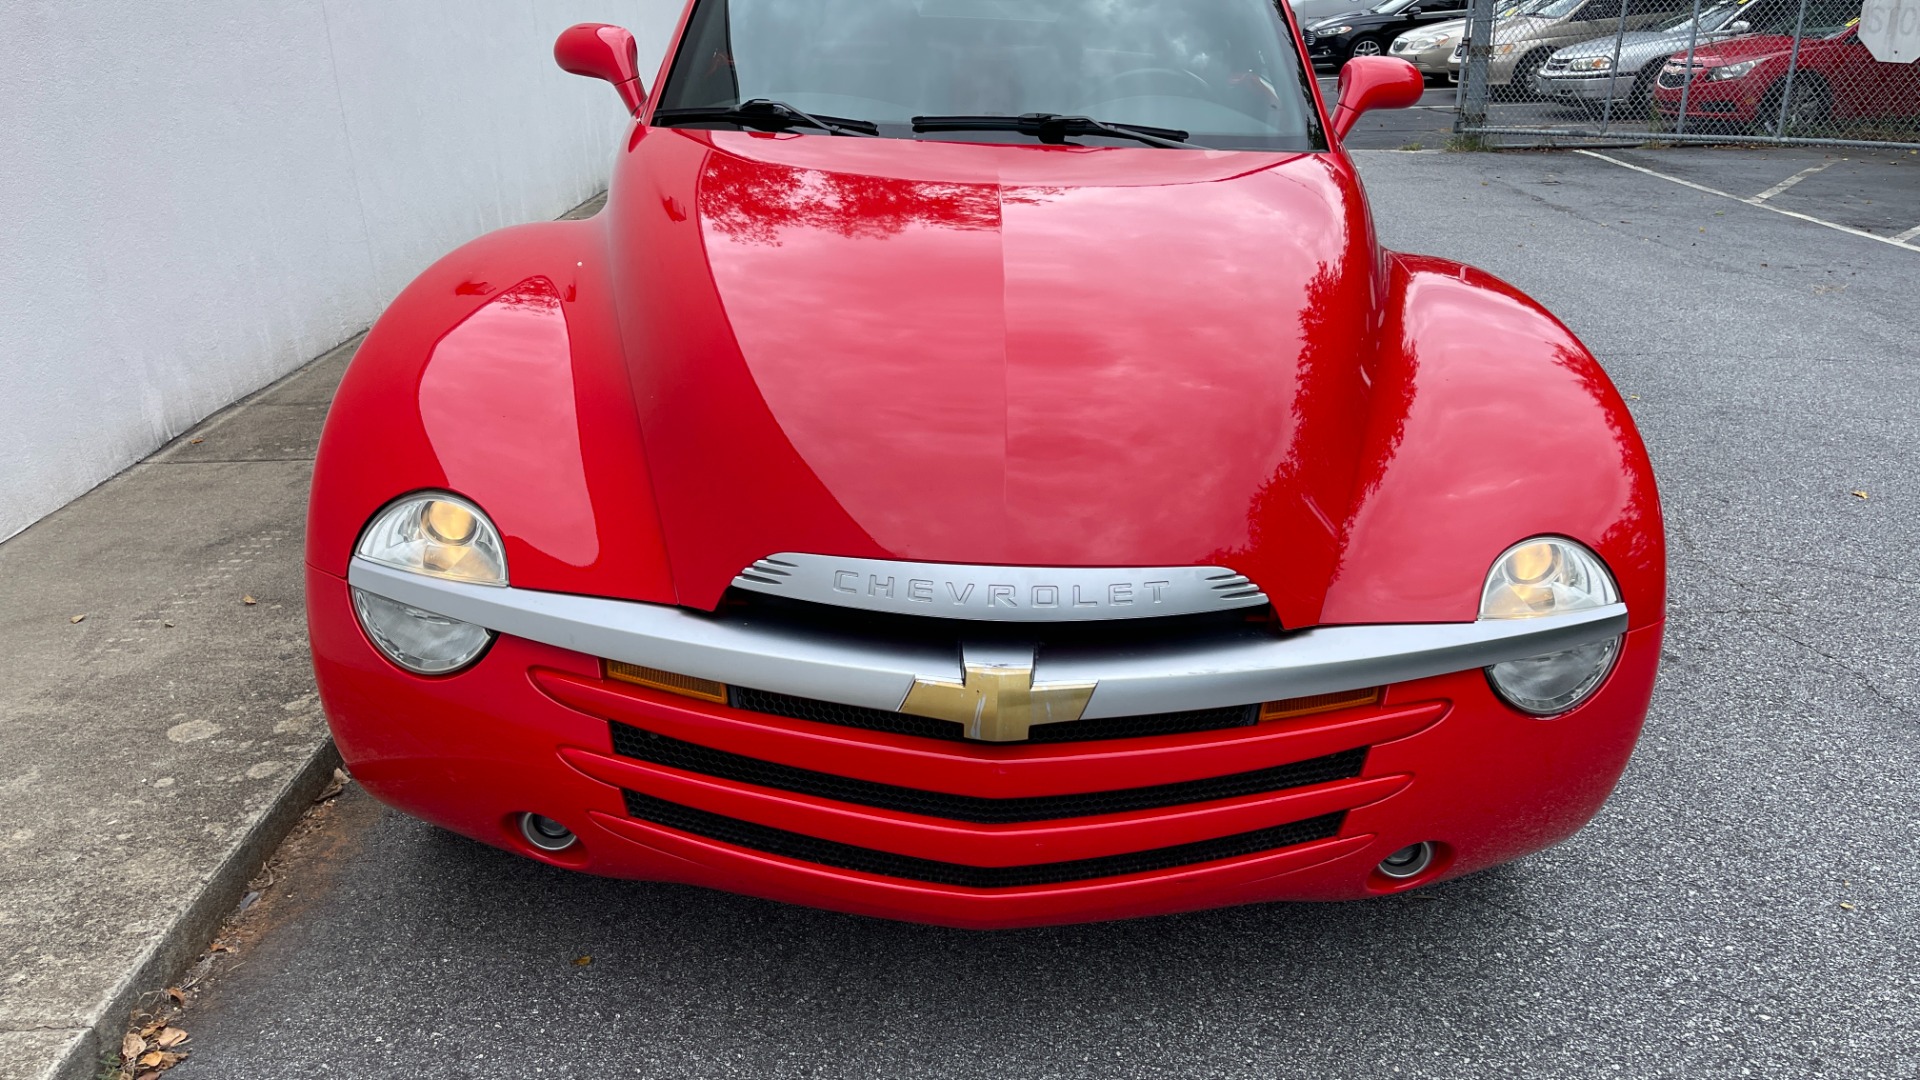 Used 2004 Chevrolet SSR LS / CONVERTIBLE / 5.3L V8 / LEATHER / HEATED SEATS / BACKUP CAMERA for sale Sold at Formula Imports in Charlotte NC 28227 38